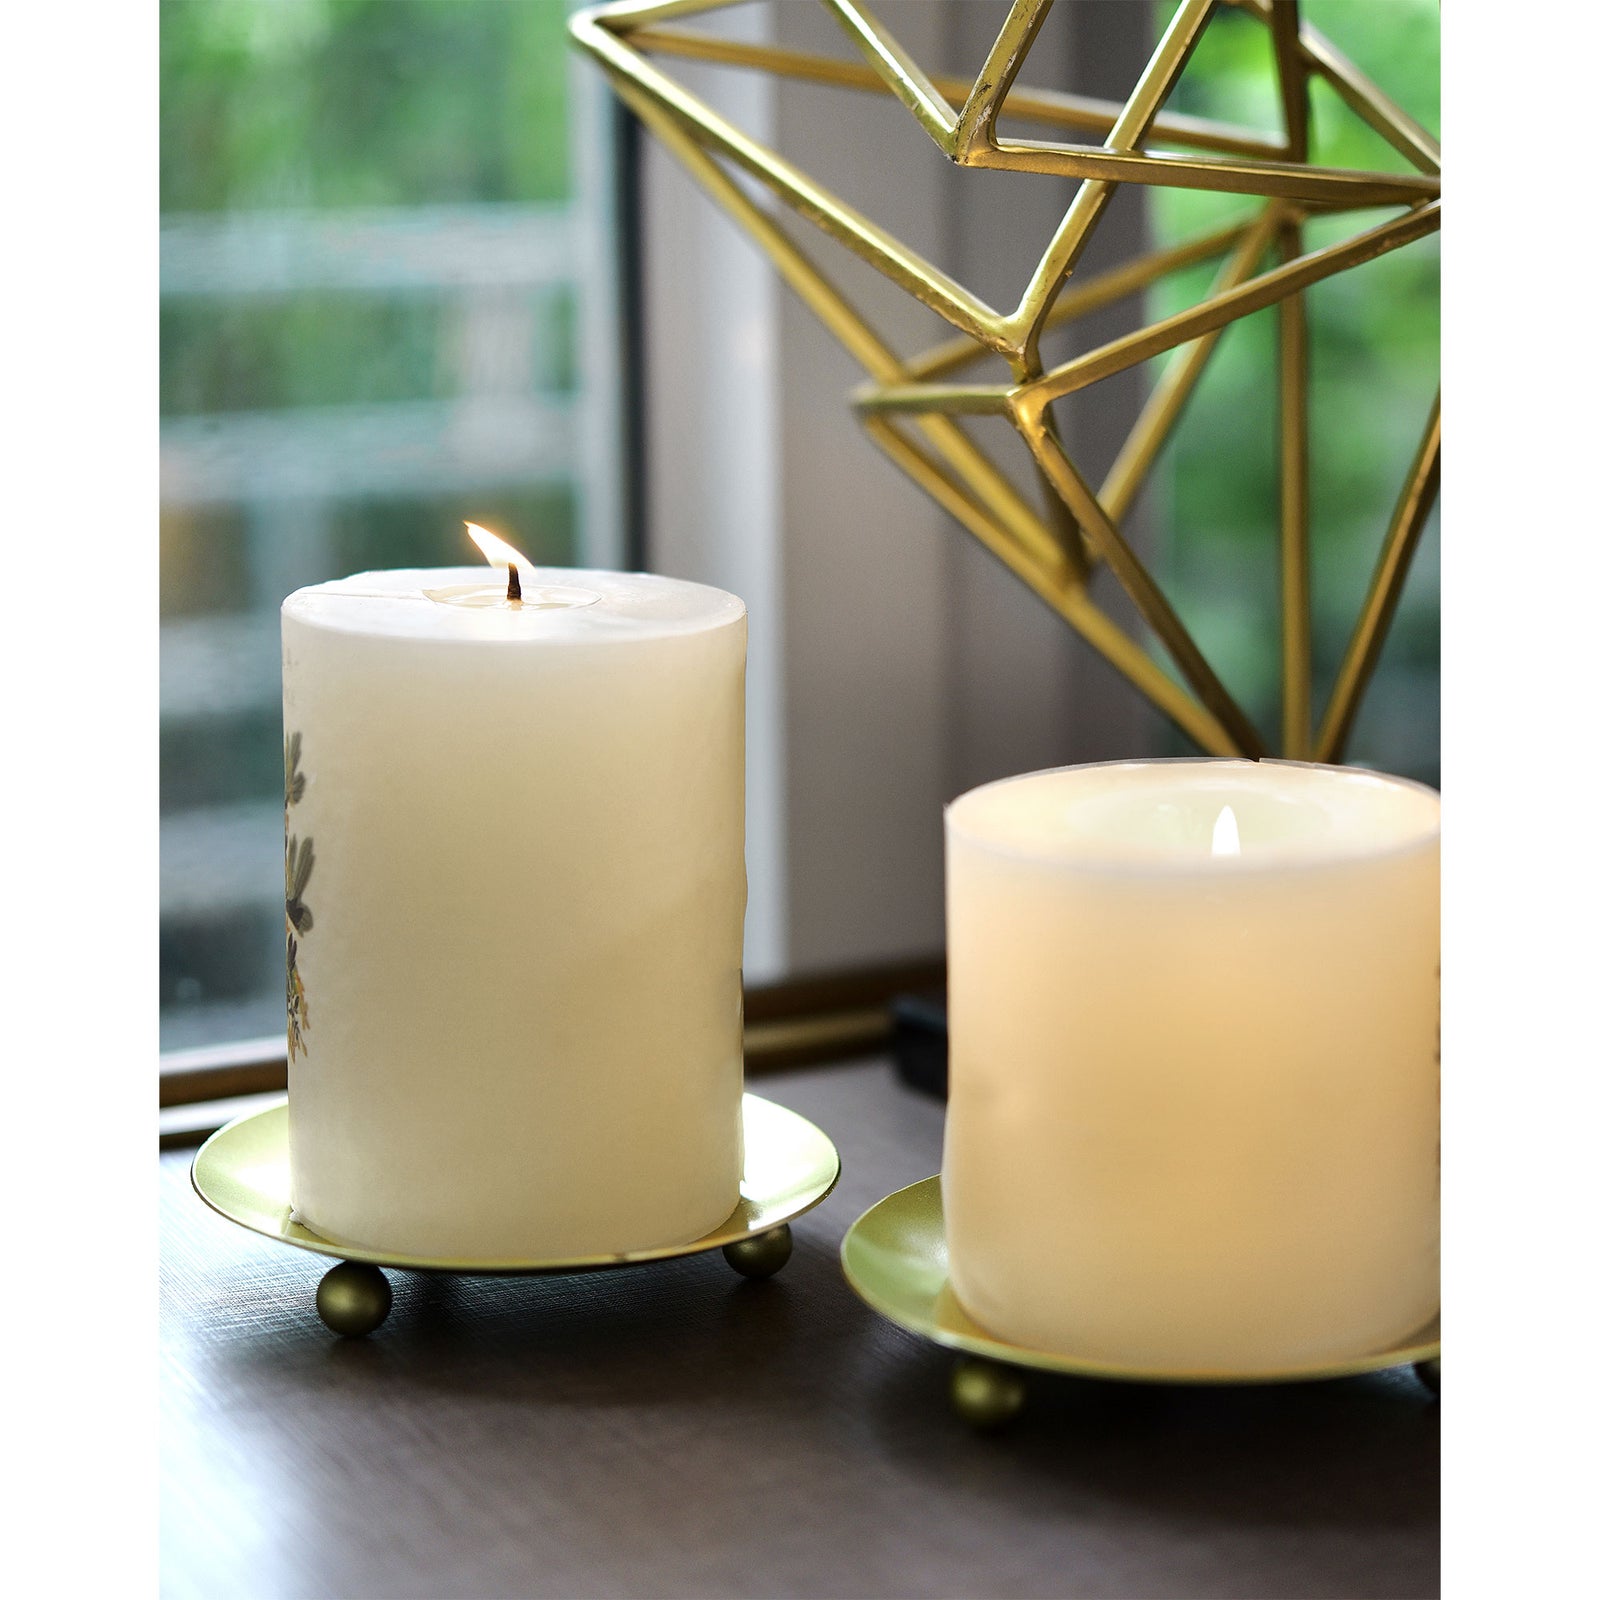 2 Gold Plated Round Iron Candle Holders for Pillar Votive Wax Candles